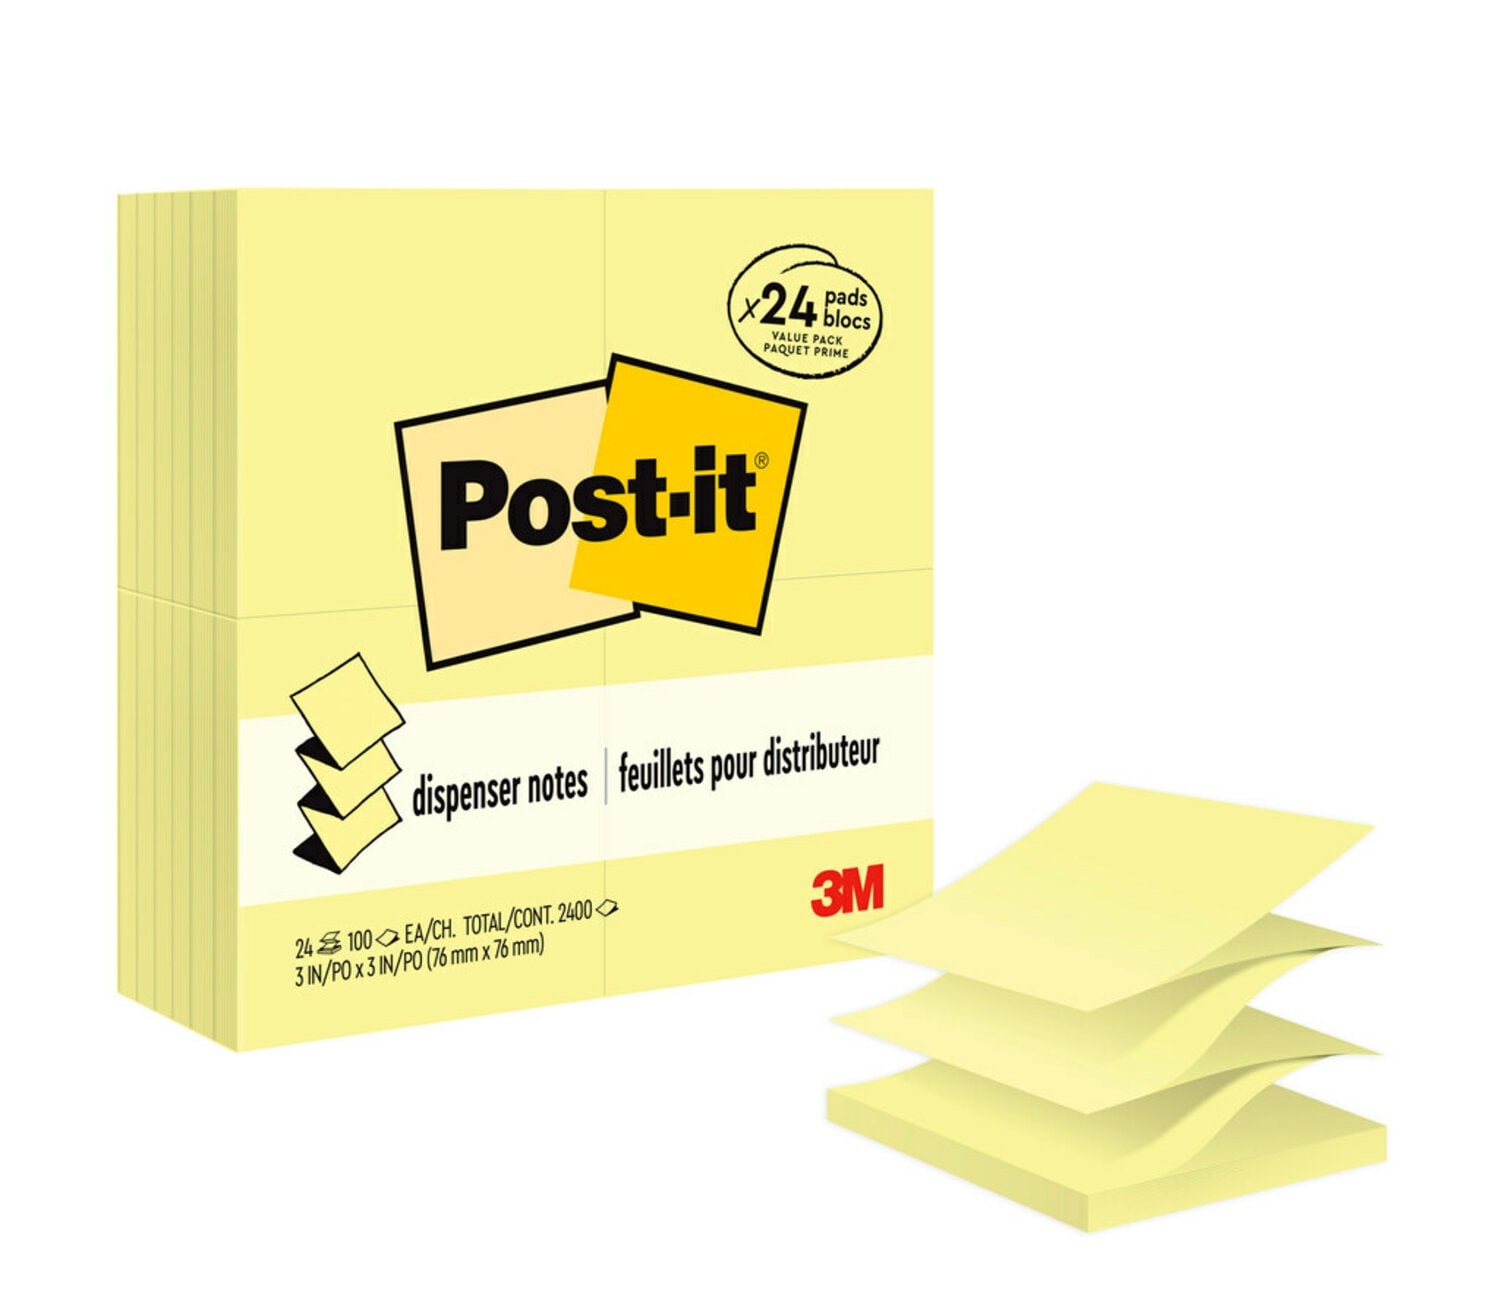 7100230169 - Post-it Dispenser Pop-up Notes R330-24VAD, 3 in x 3 in, Canary Yellow